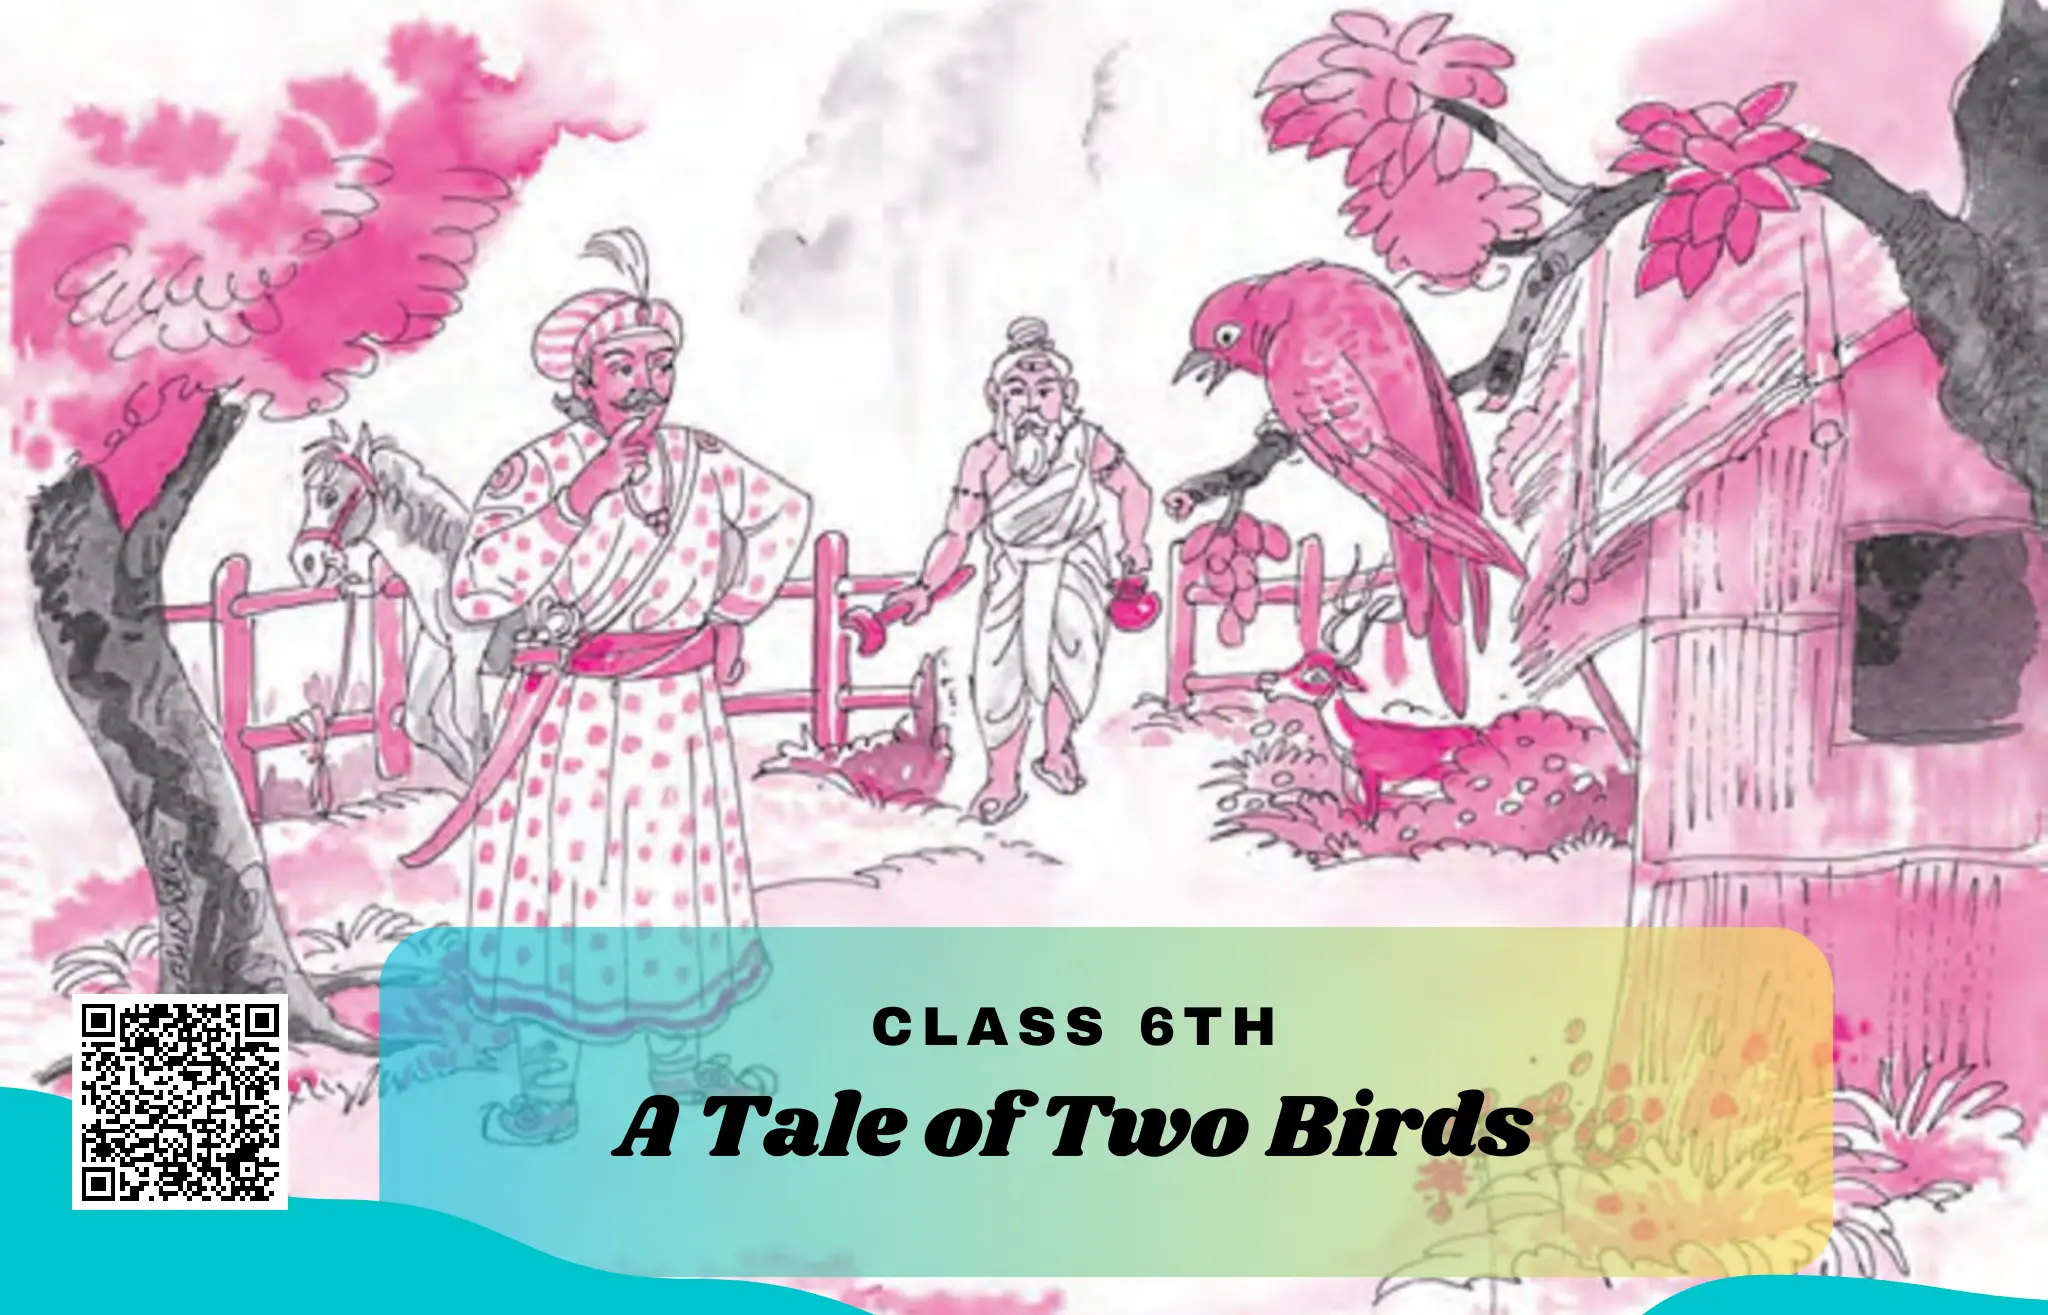 The story, “A Tale of Two Birds” is about two birds who are separated from each other due to a storm and find different homes.